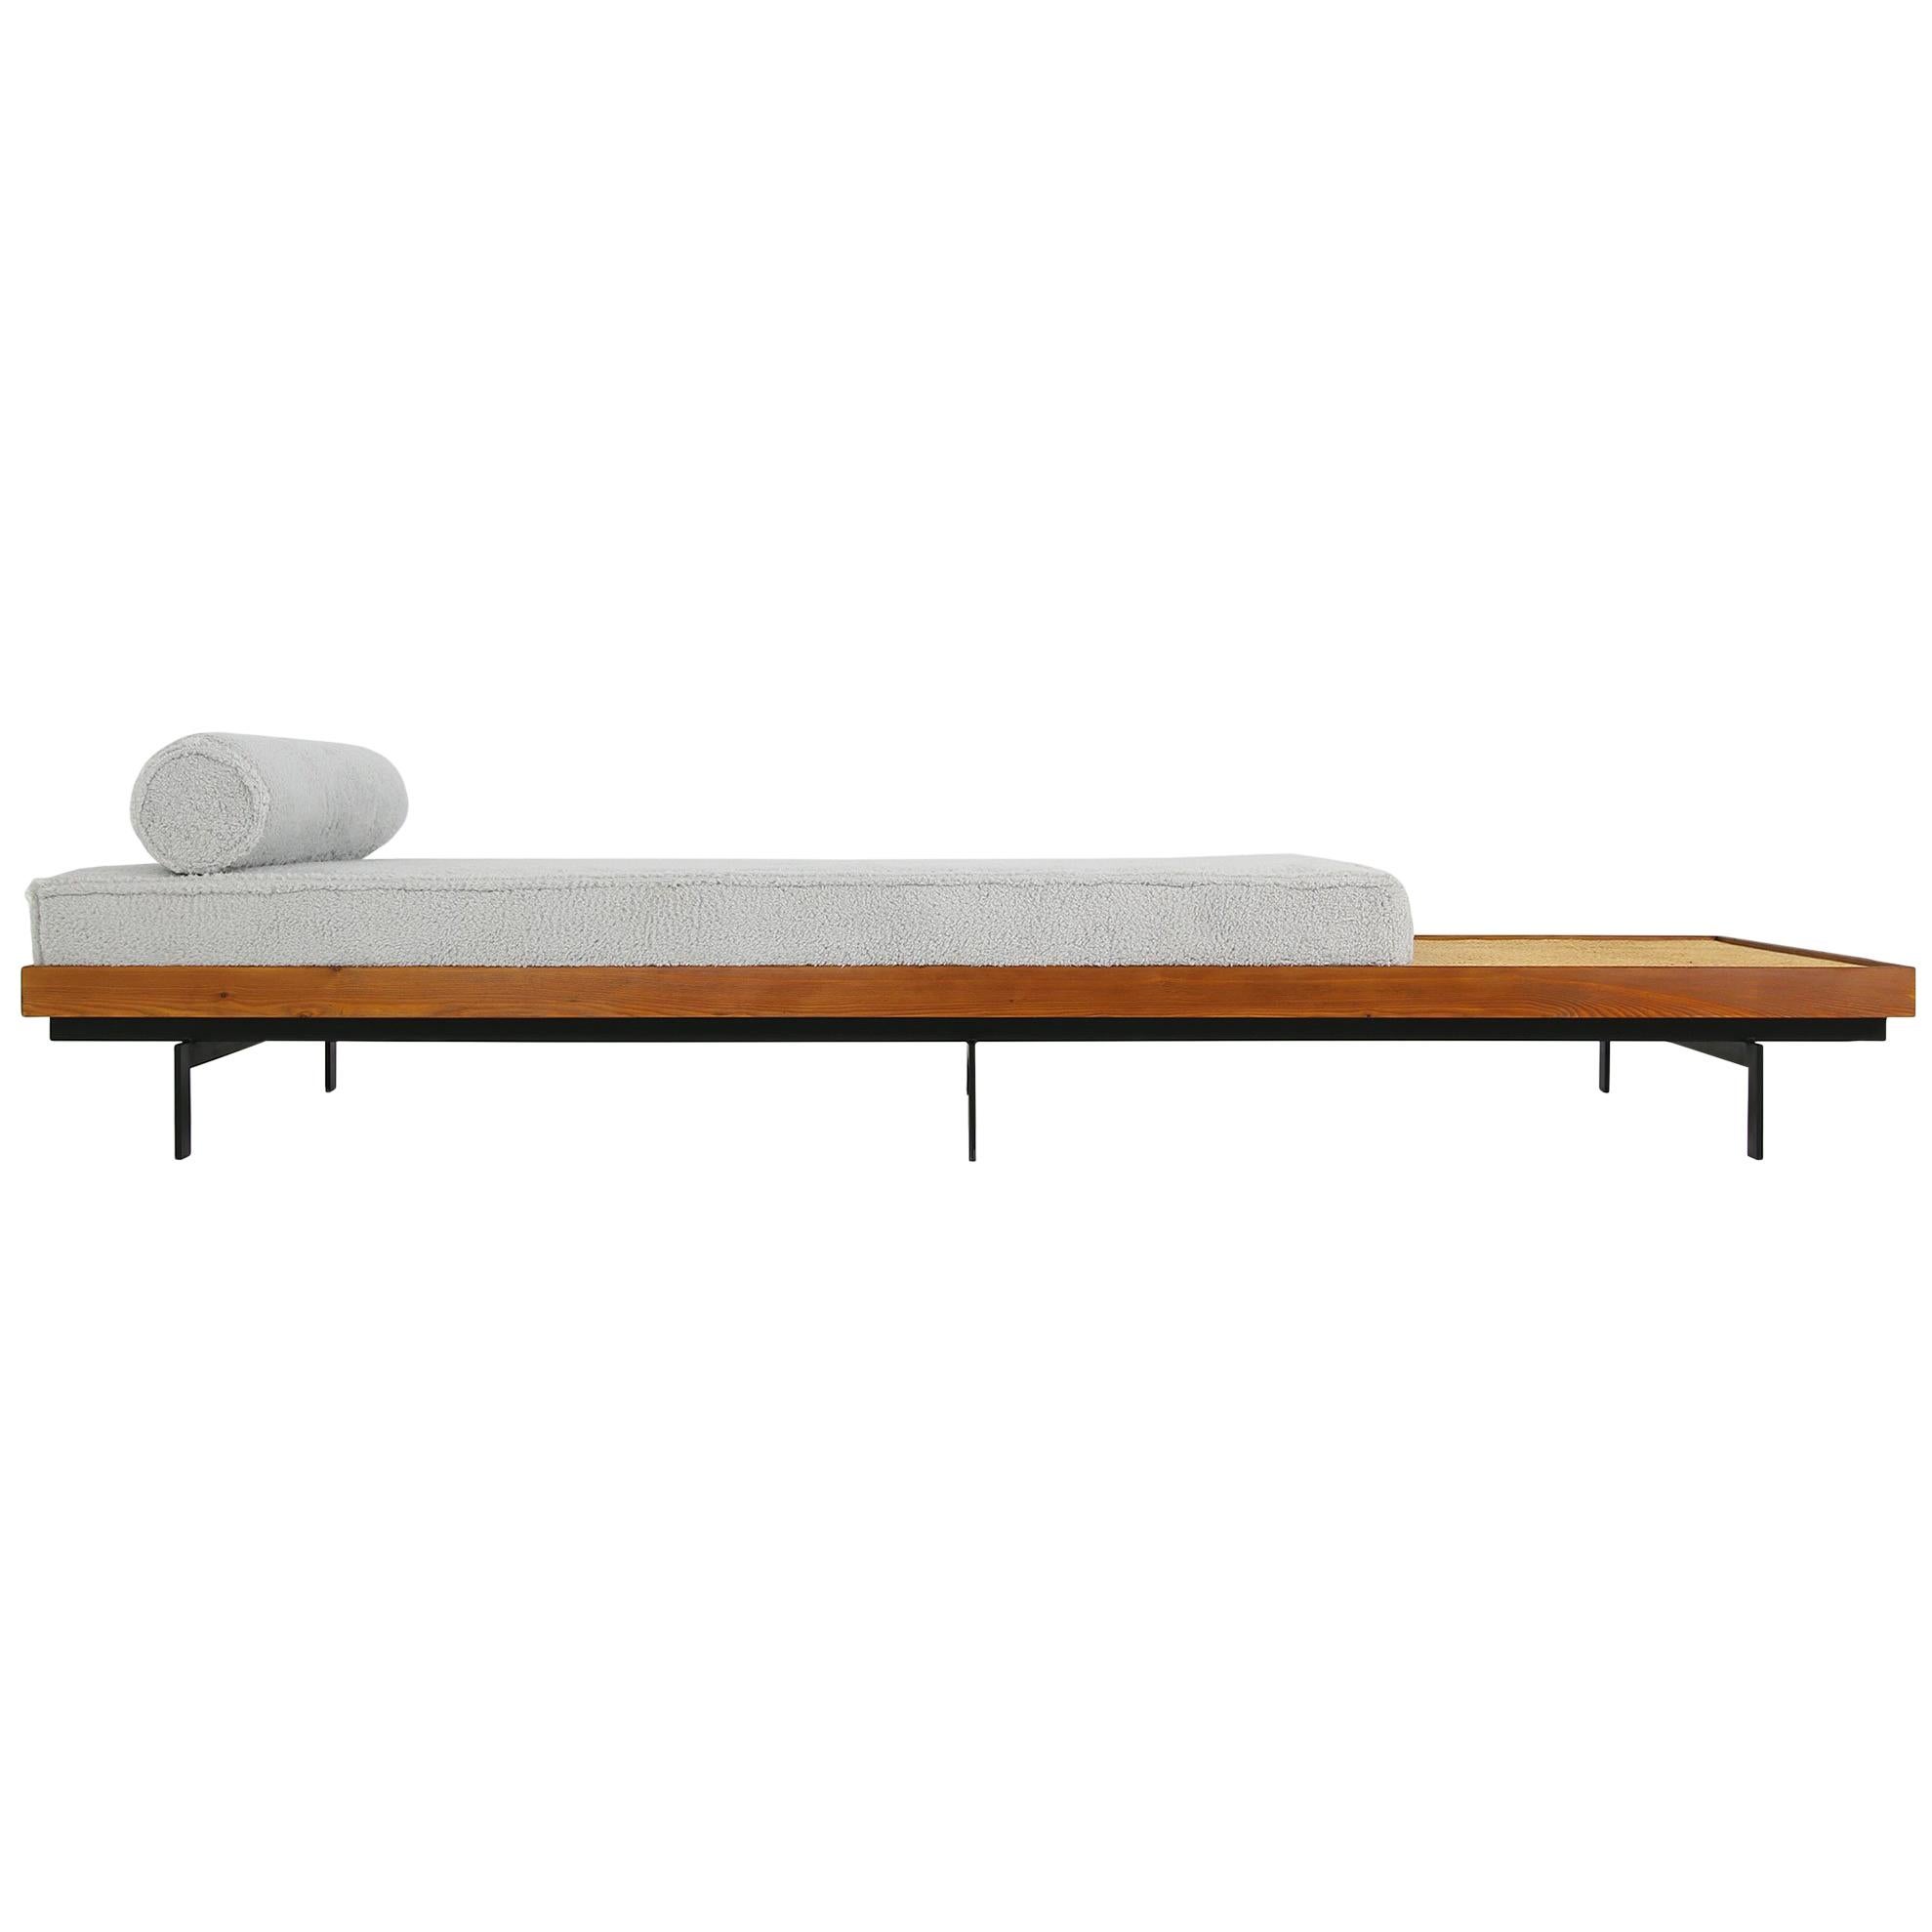 Nathan Lindberg Long Daybed Mod NL 31L Sofa, Siberian Larch Wood, Steel and Cane